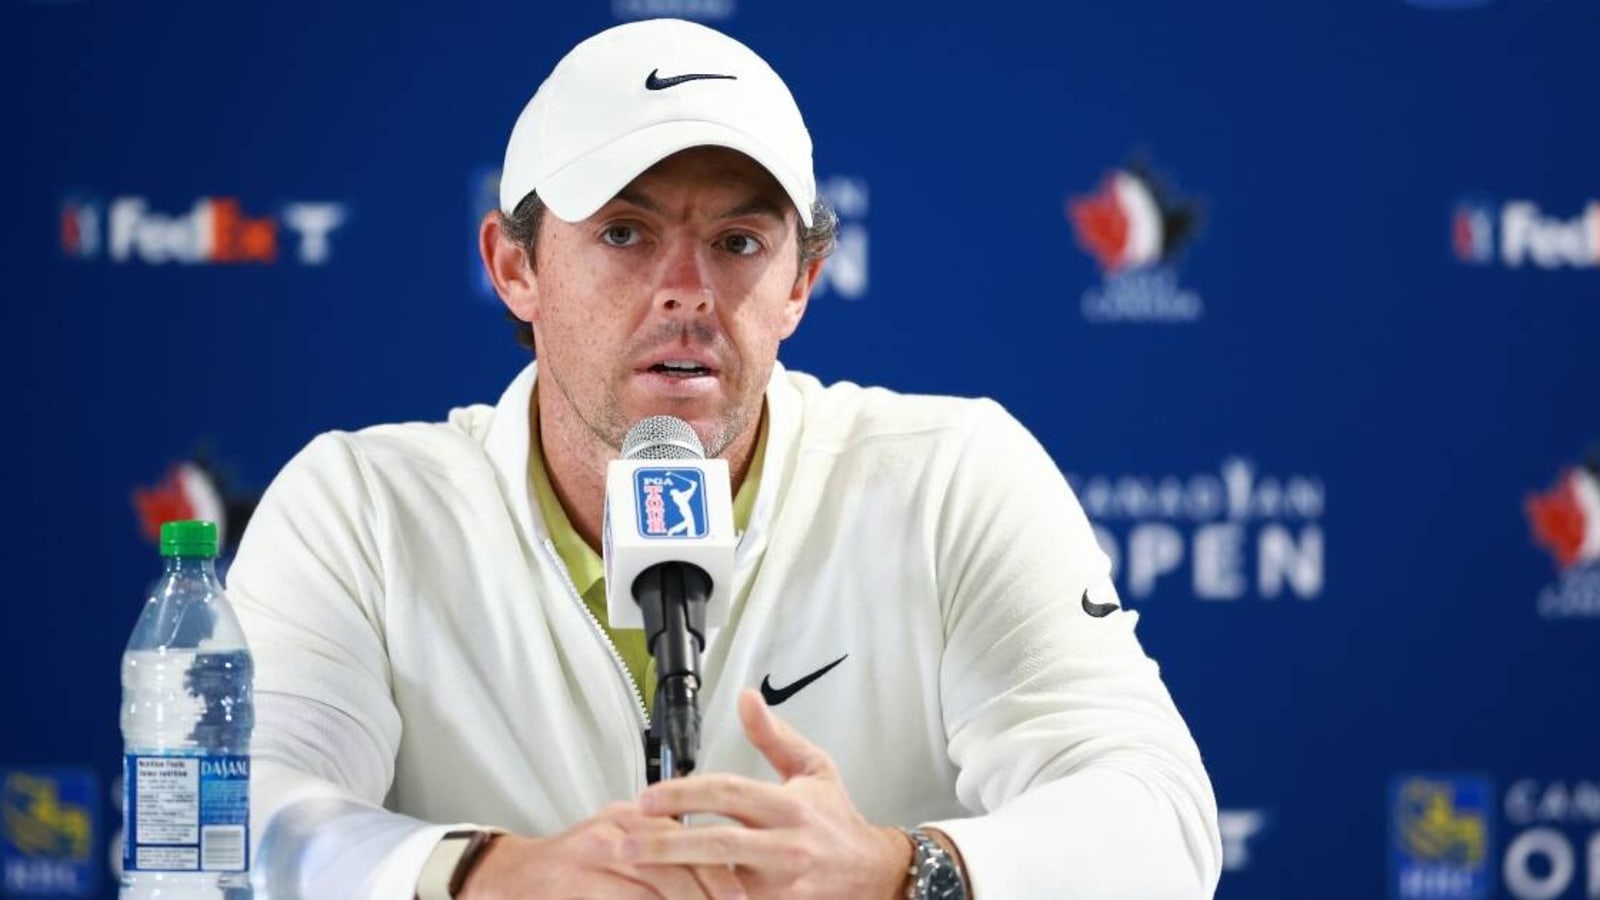 Rory McIlroy explains why he won’t move to LIV Golf: ‘It’s not for me’